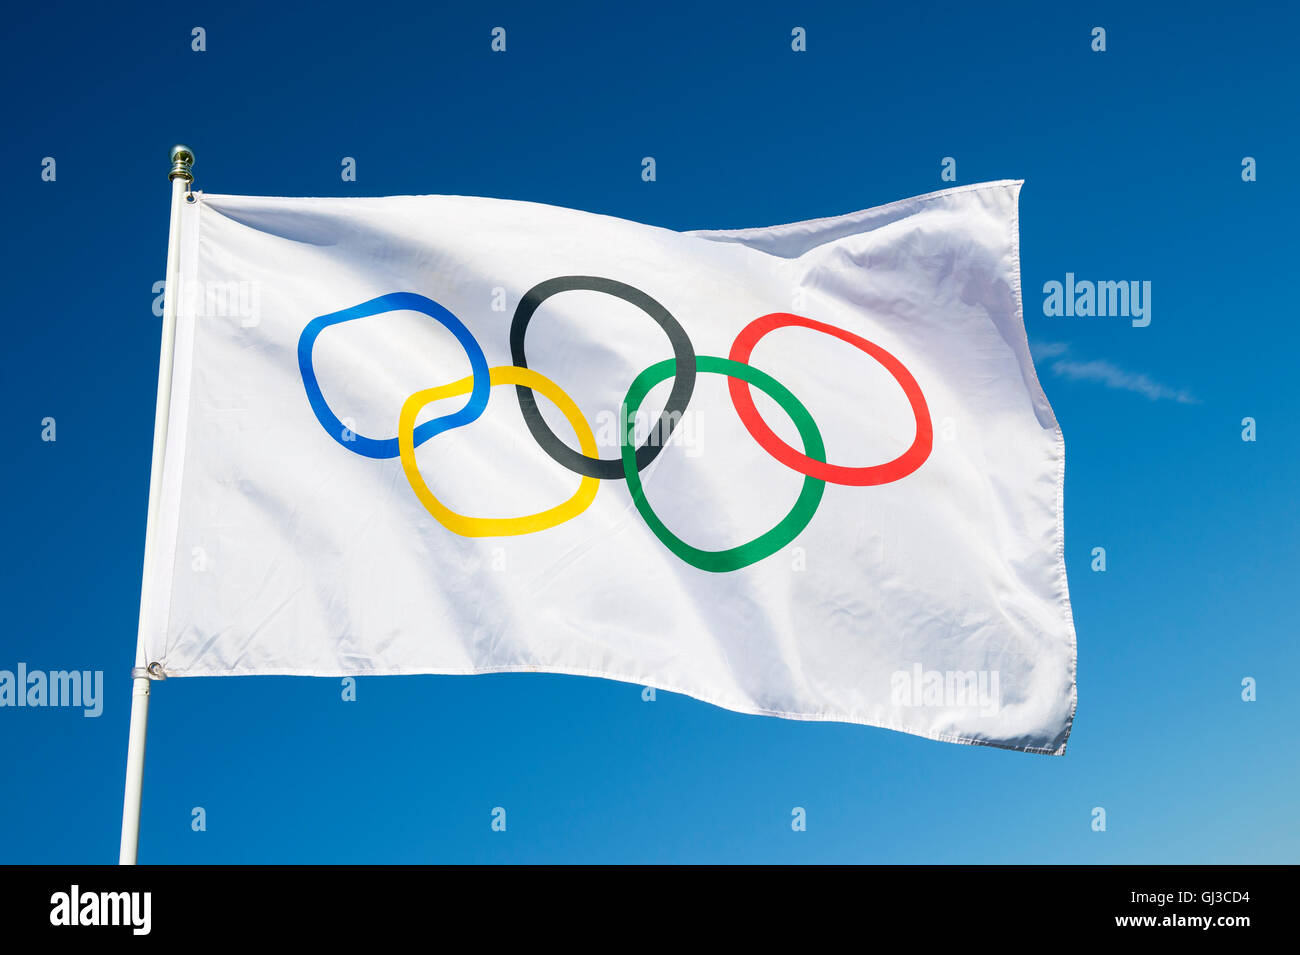 RIO DE JANEIRO - MARCH 27, 2016: An Olympic flag flutters in the wind against bright blue sky. Stock Photo